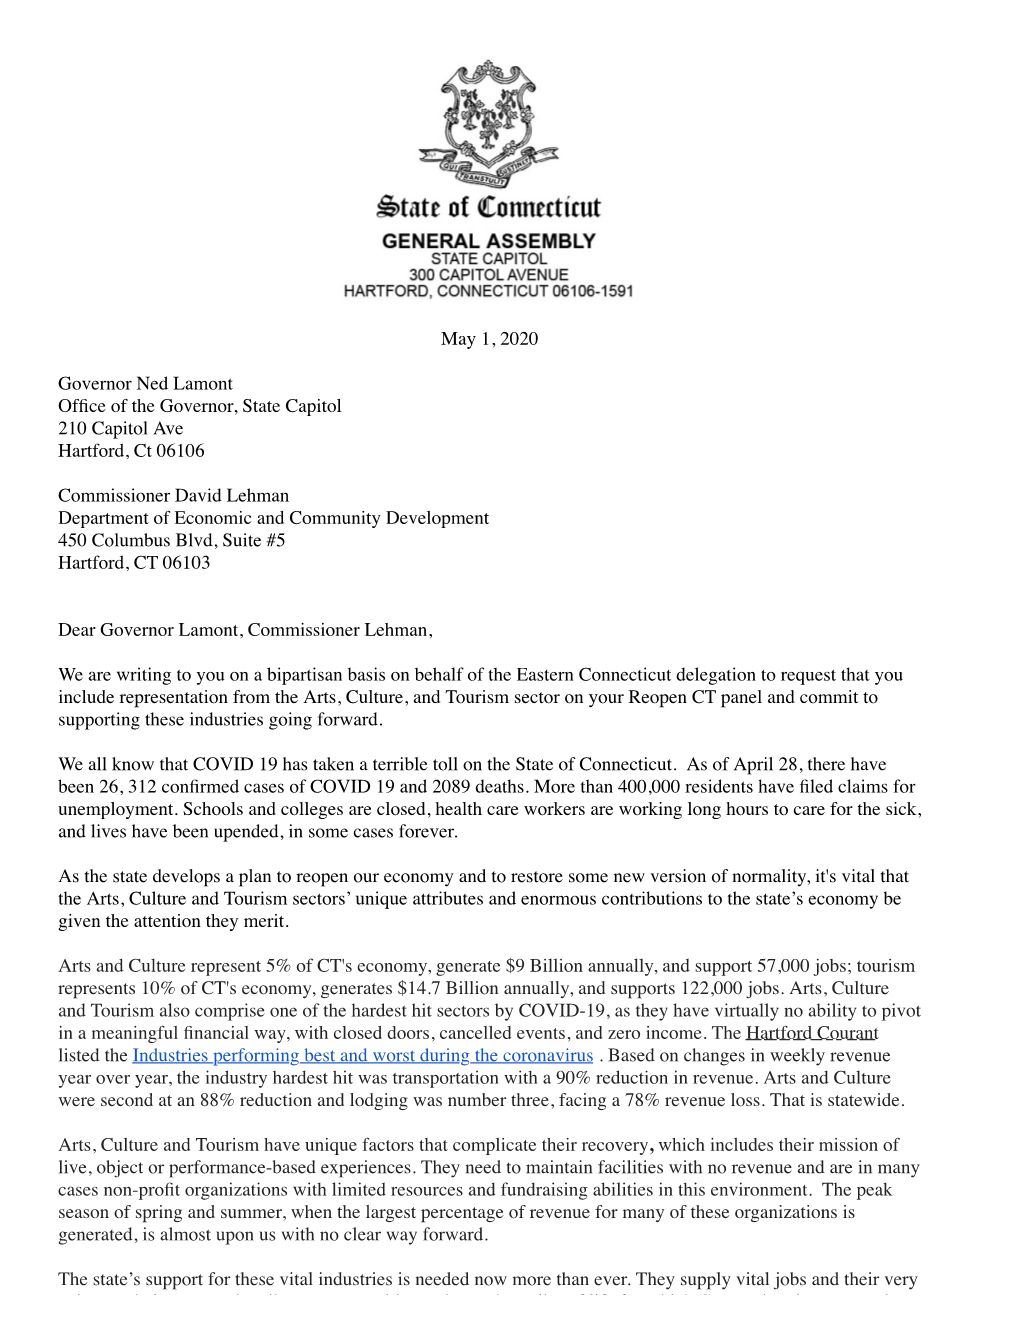 ACT Reopen Eastern CT Delegation Letter May 2020